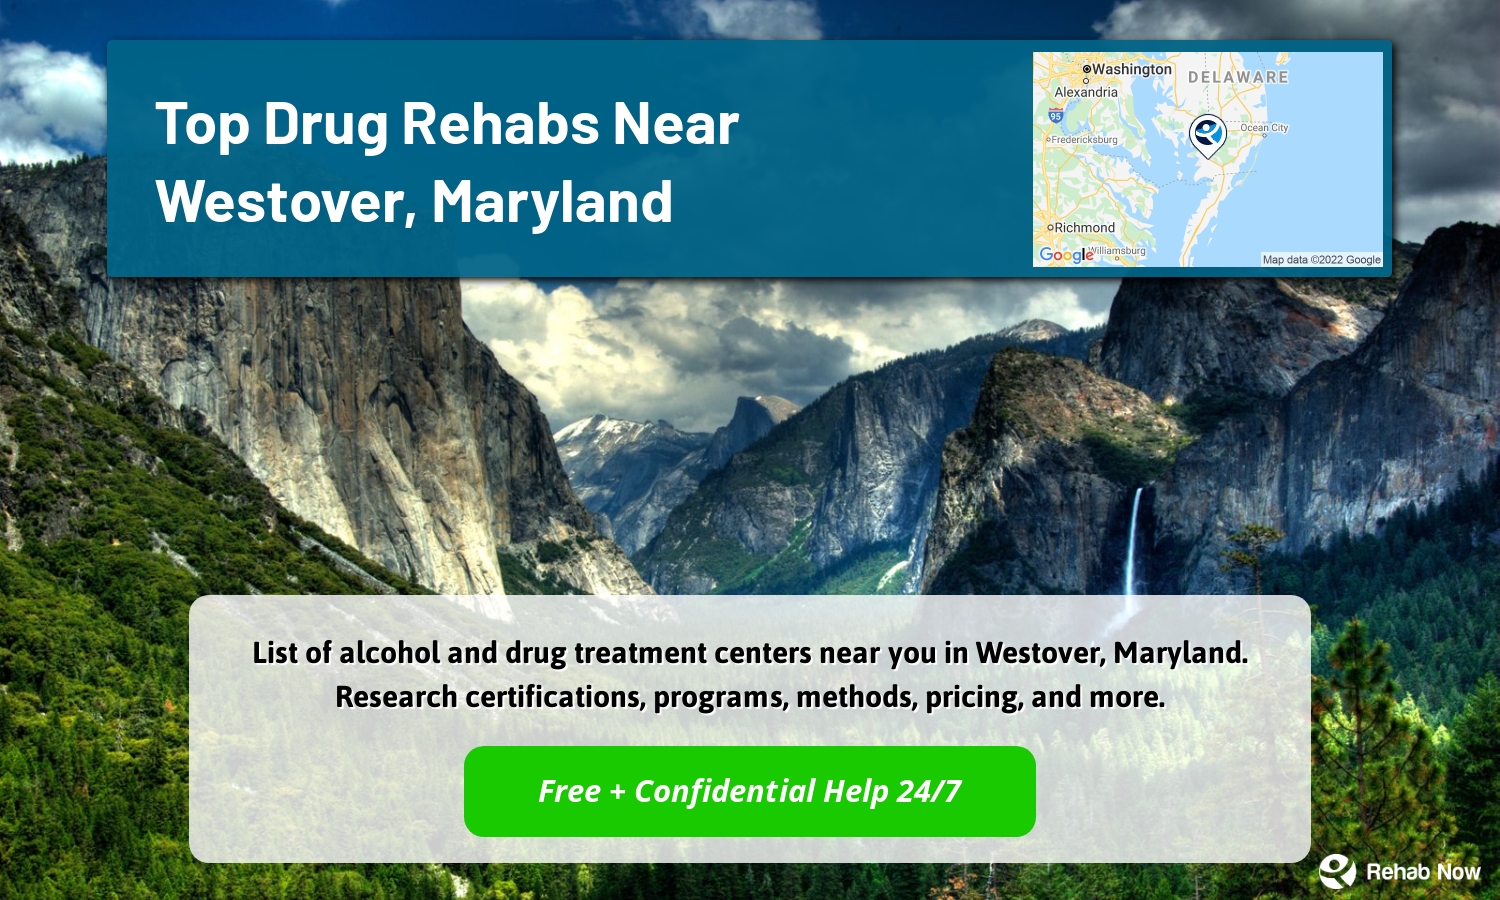 List of alcohol and drug treatment centers near you in Westover, Maryland. Research certifications, programs, methods, pricing, and more.